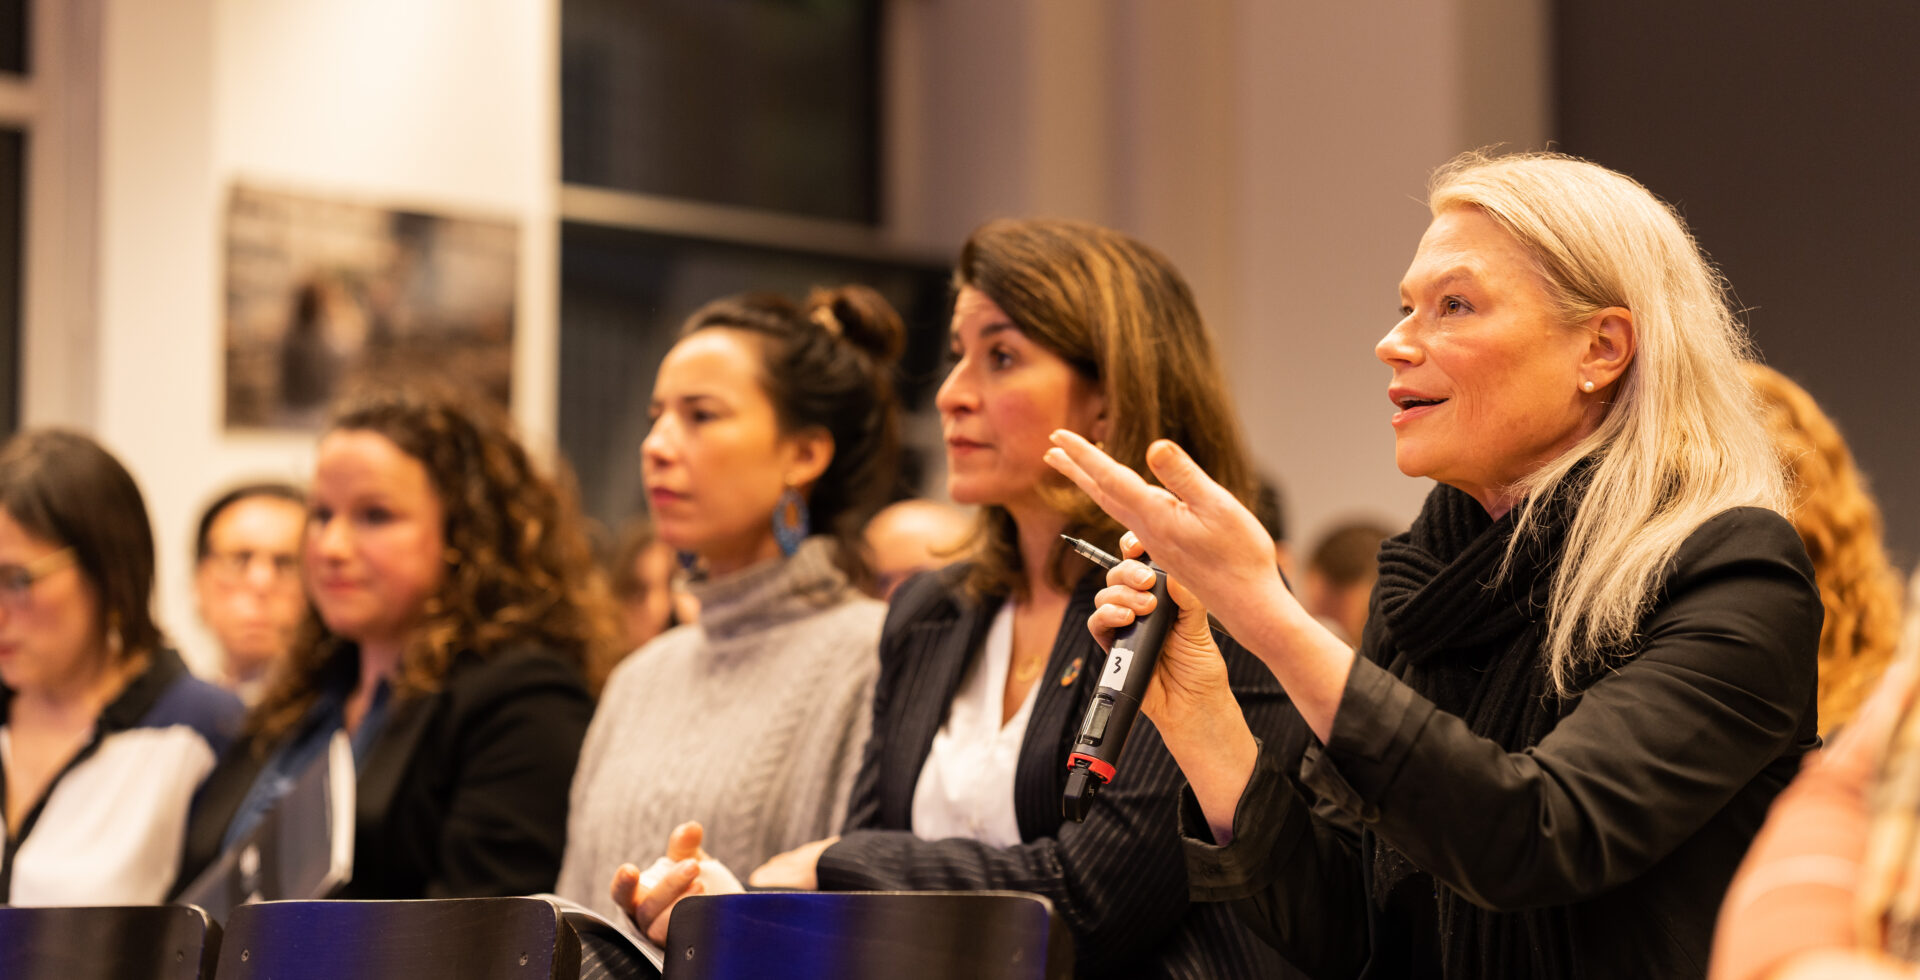 Attendees of launch event of CFH's Justice Beyond Borders project in the Hague, with one of them asking a question